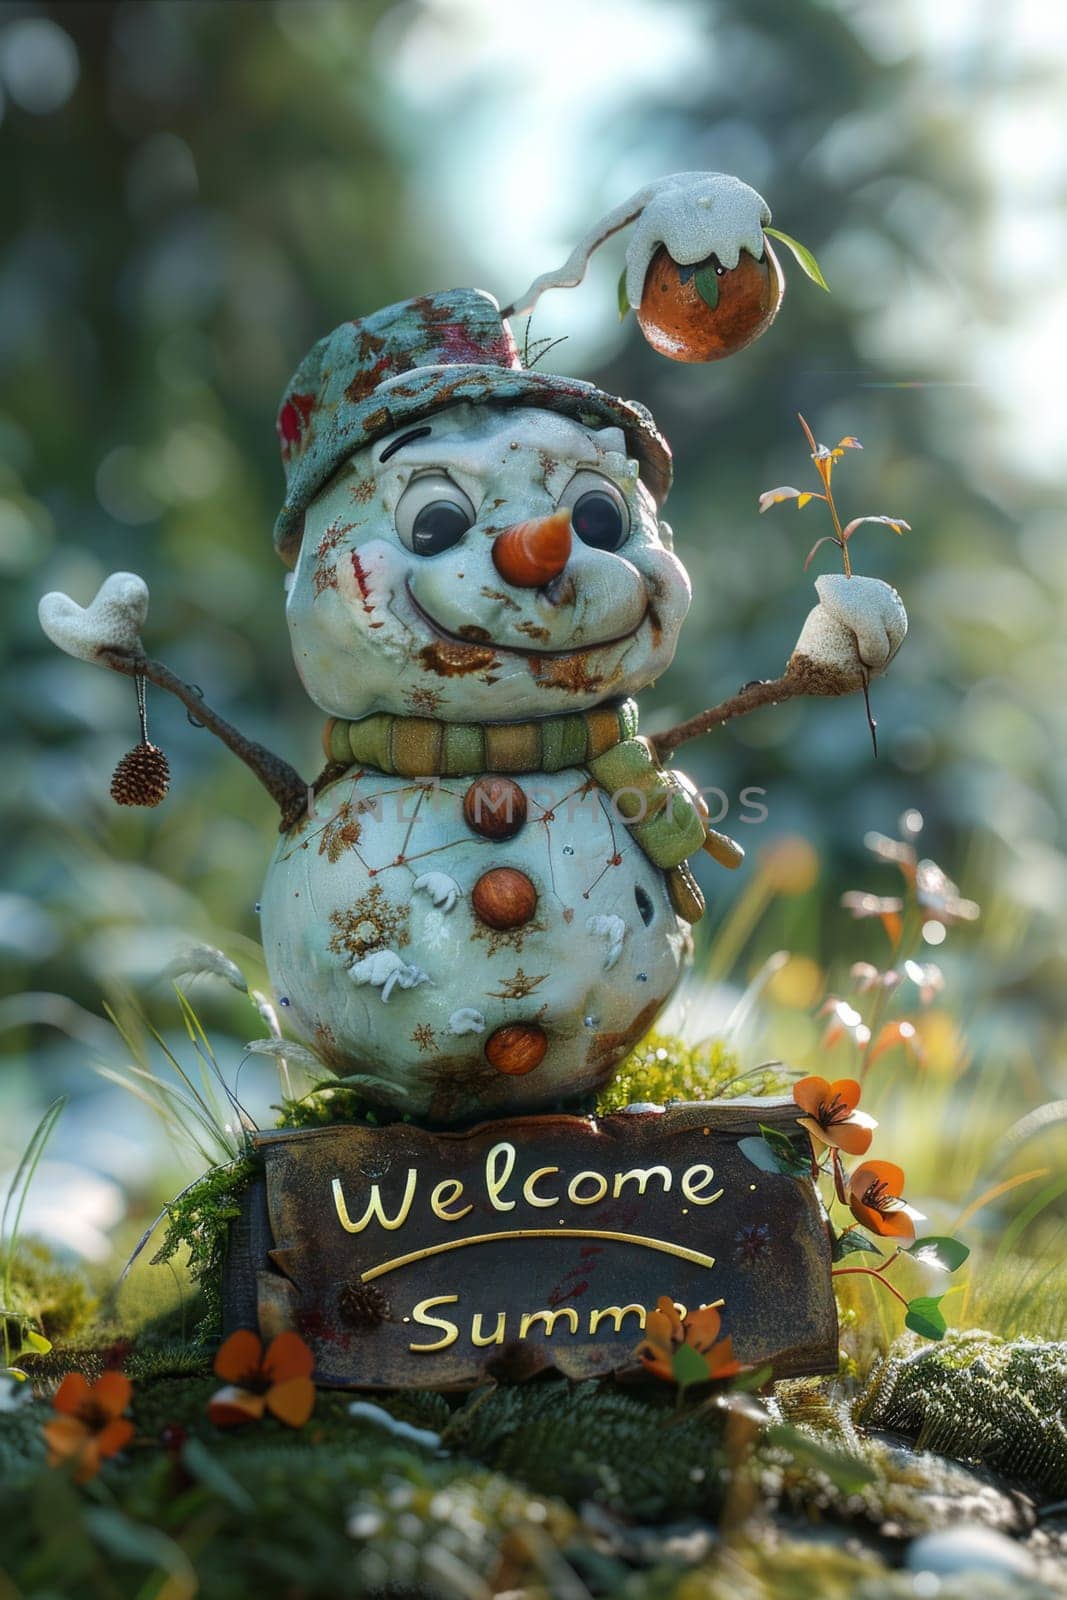 Funny little snowman in nature with the inscription Welcome summer on it by Lobachad